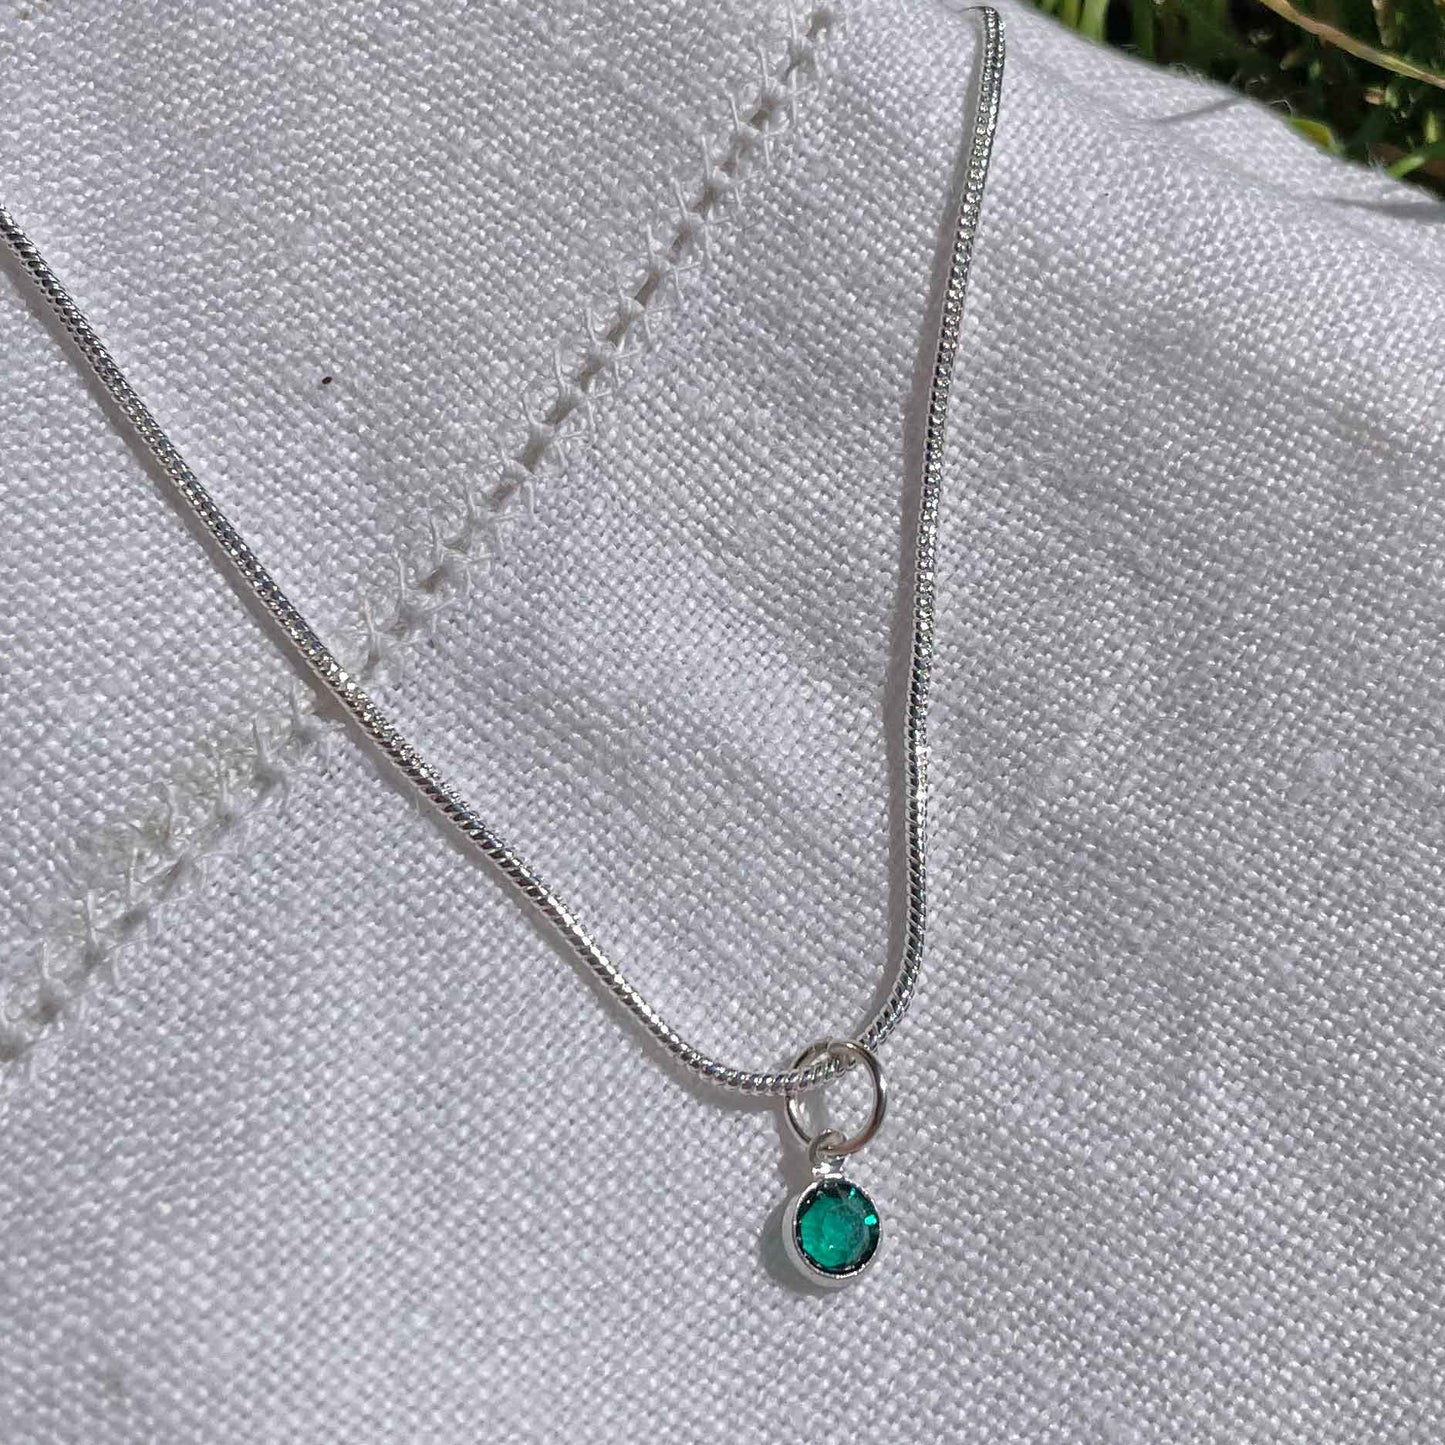 Birthstone Crystal Pendant - Silver Necklace - Welsh Language - May / Emerald